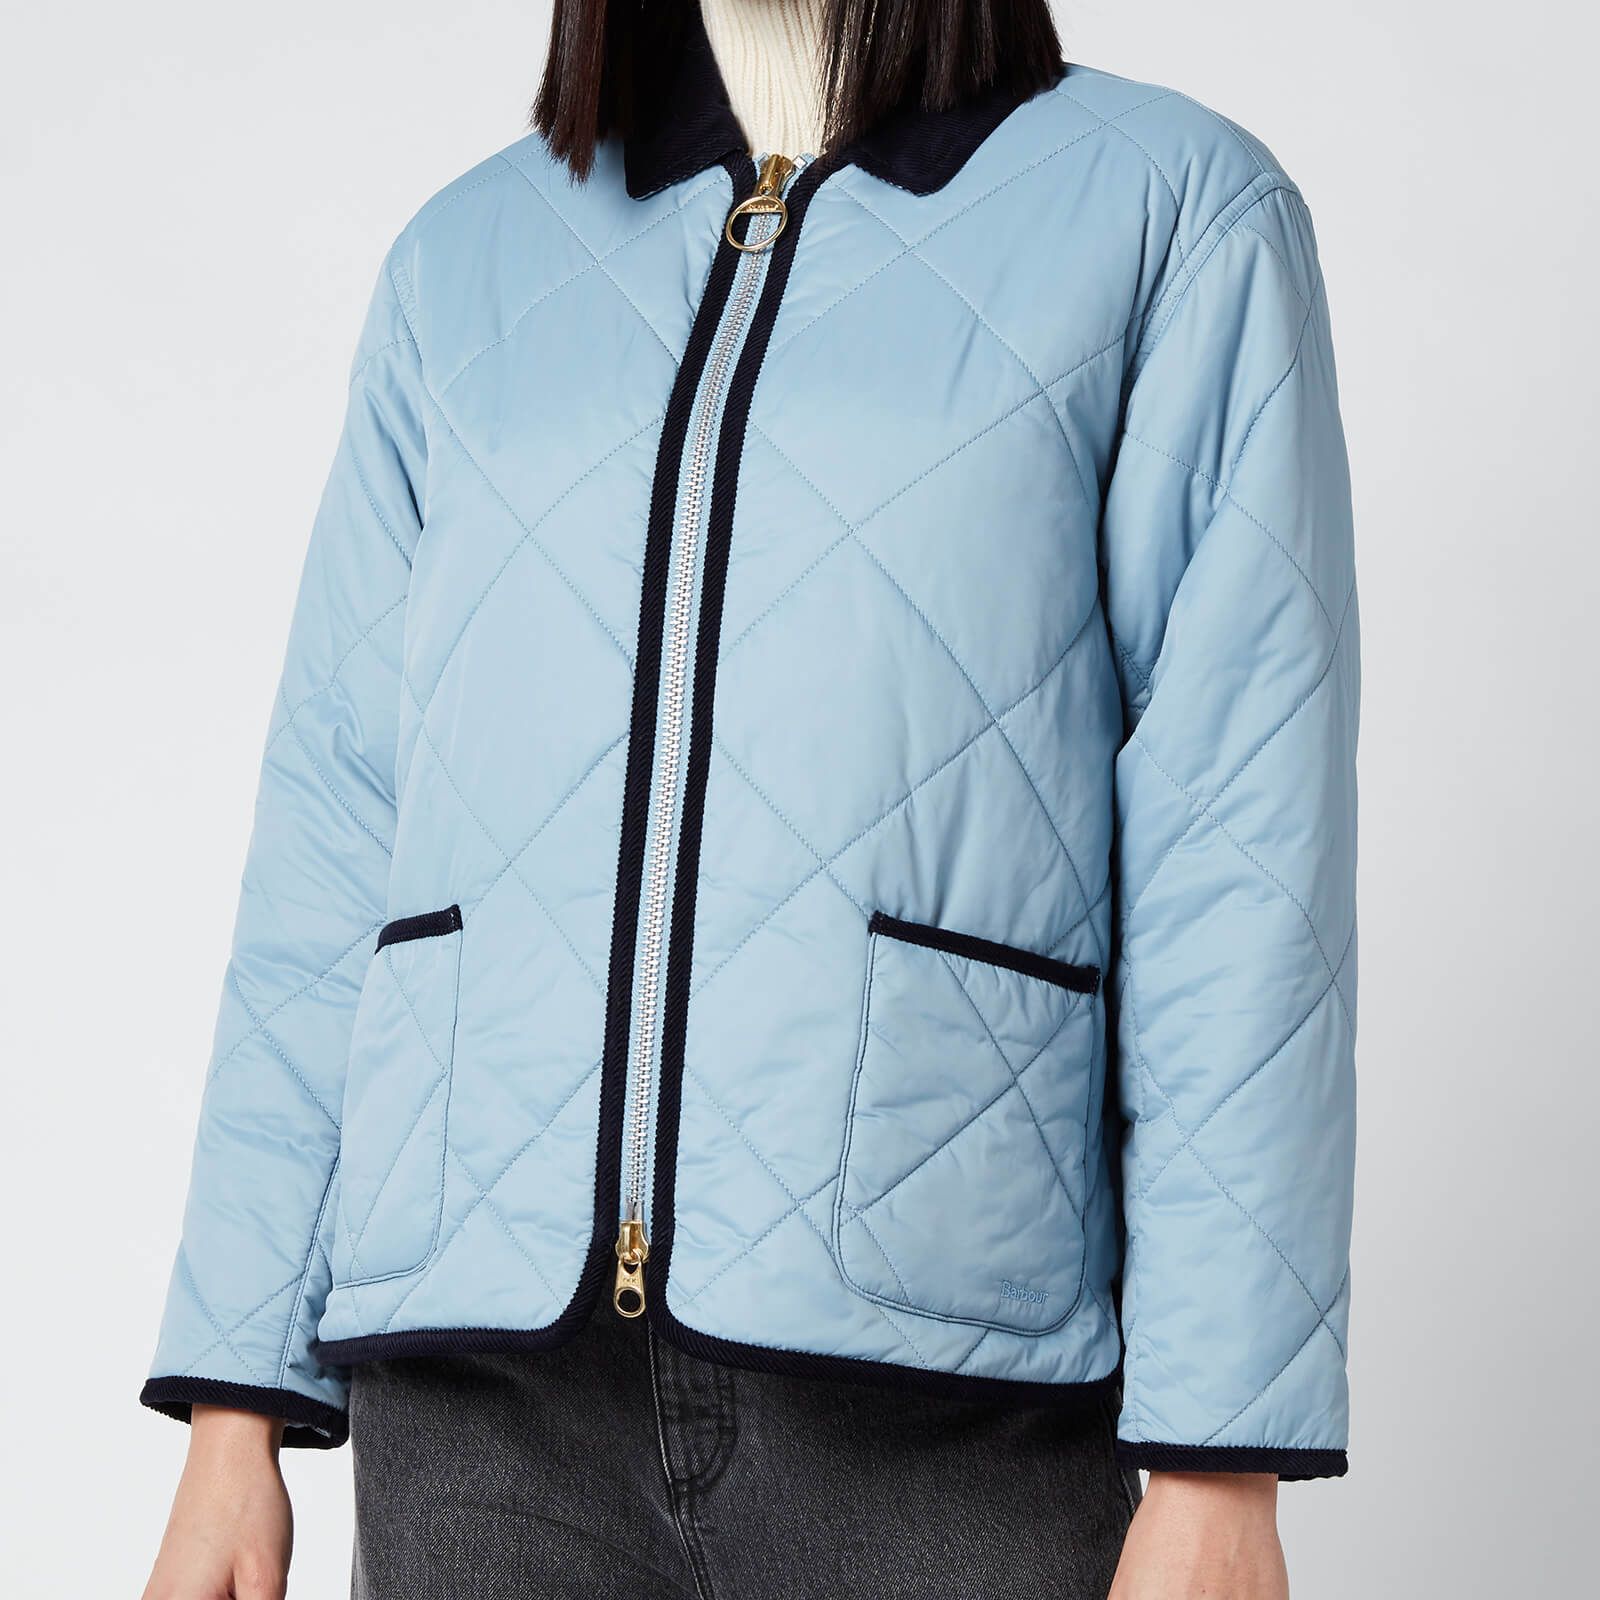 Barbour X Alexa Chung Women's Quilty Quilted Jacket - Fade Blue - UK 10